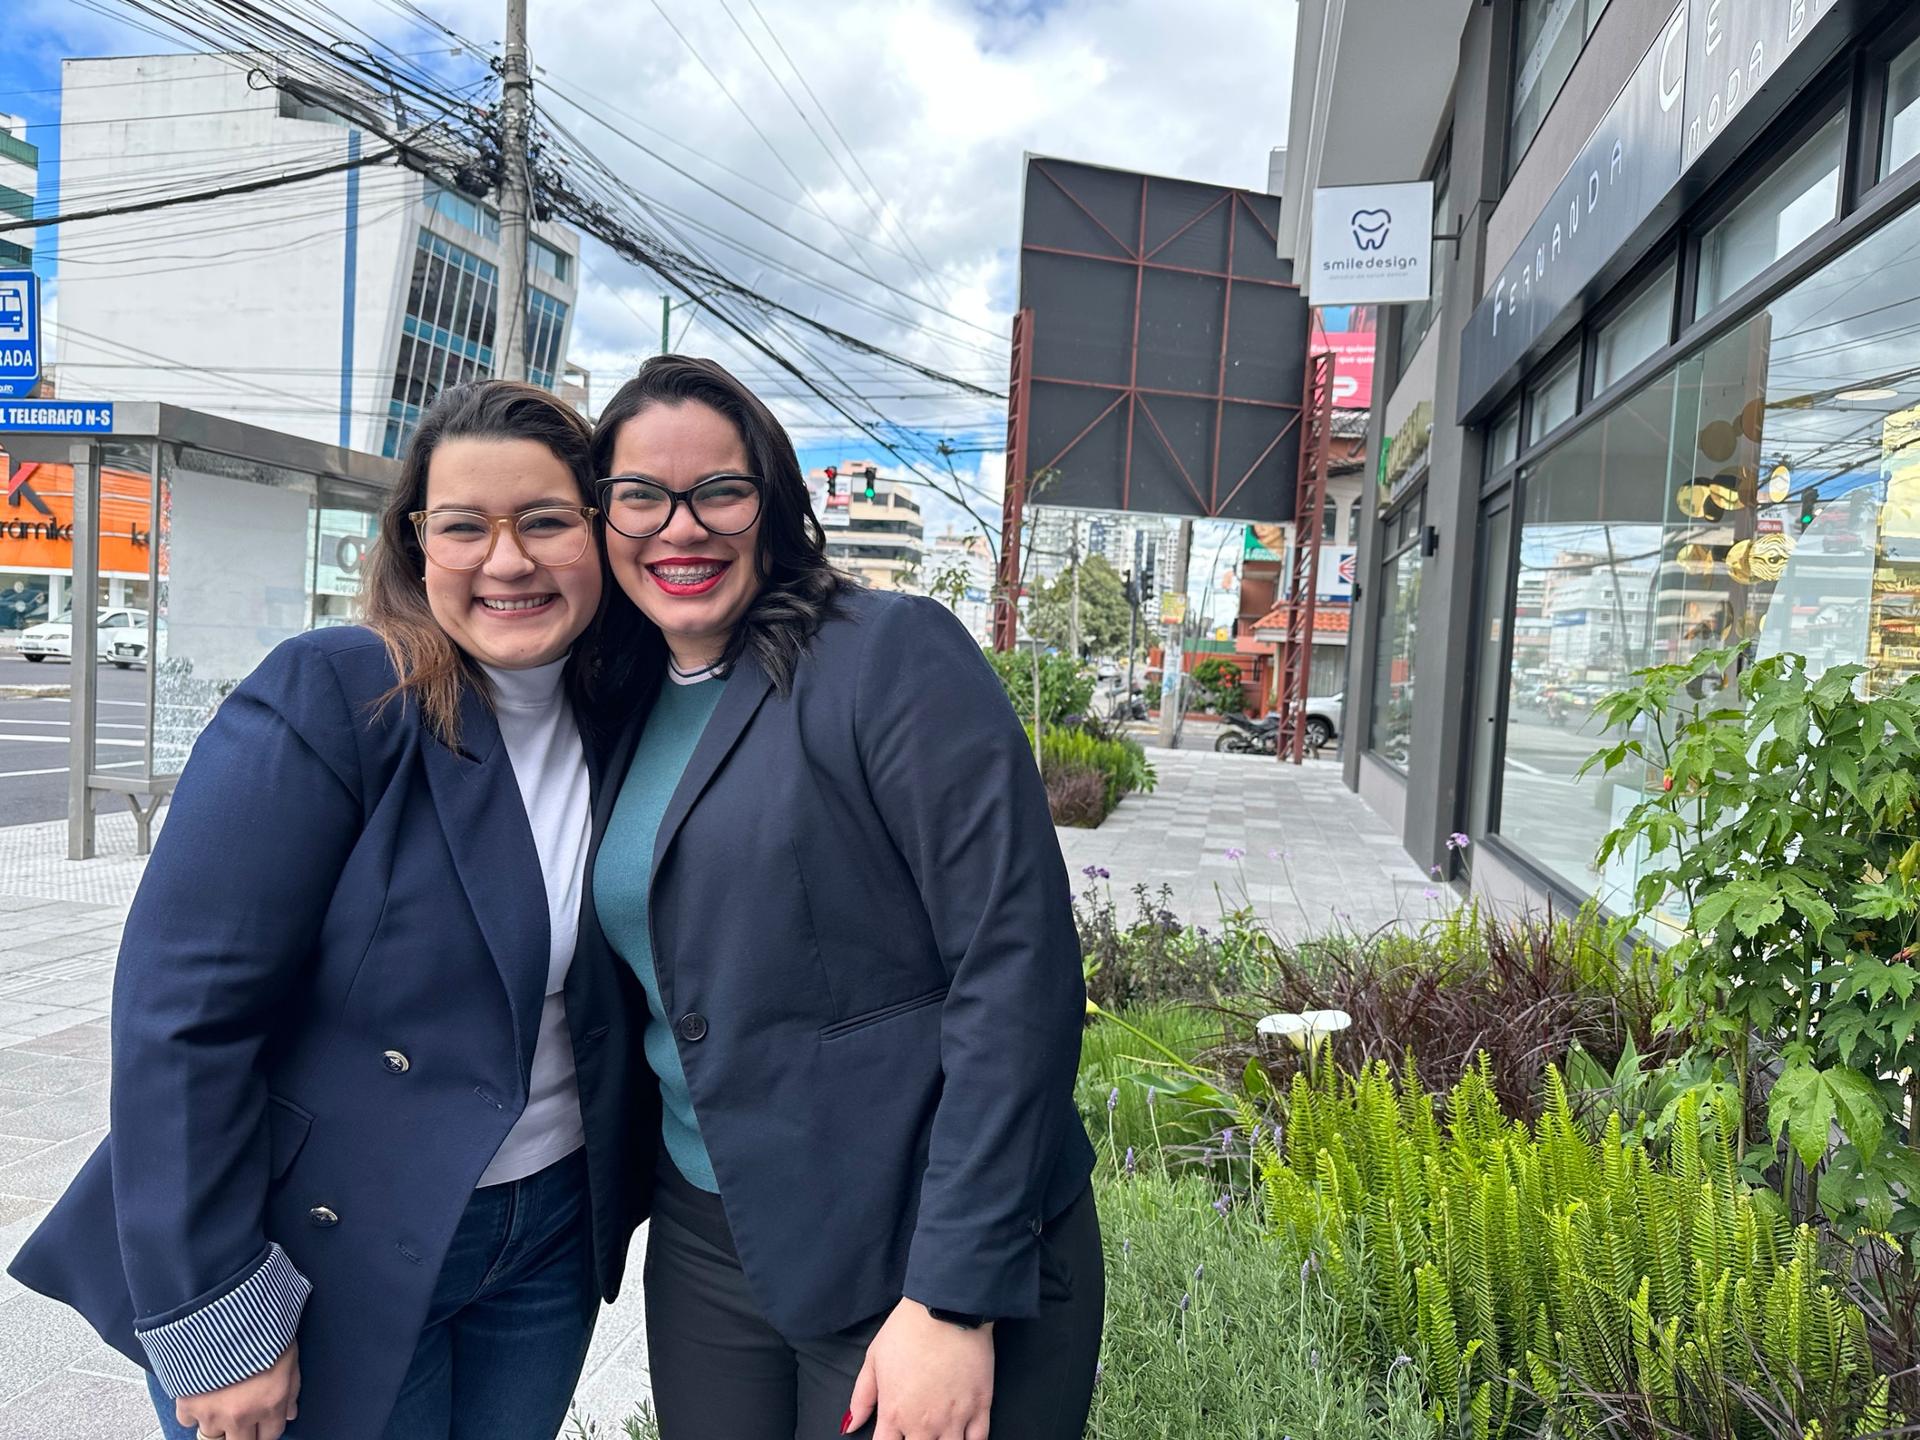 Carla Ponson (left) and her wife Maria Swift moved from Venezuela to Quito in 2018. They both believe they have been victims of xenophobia and homophobia.